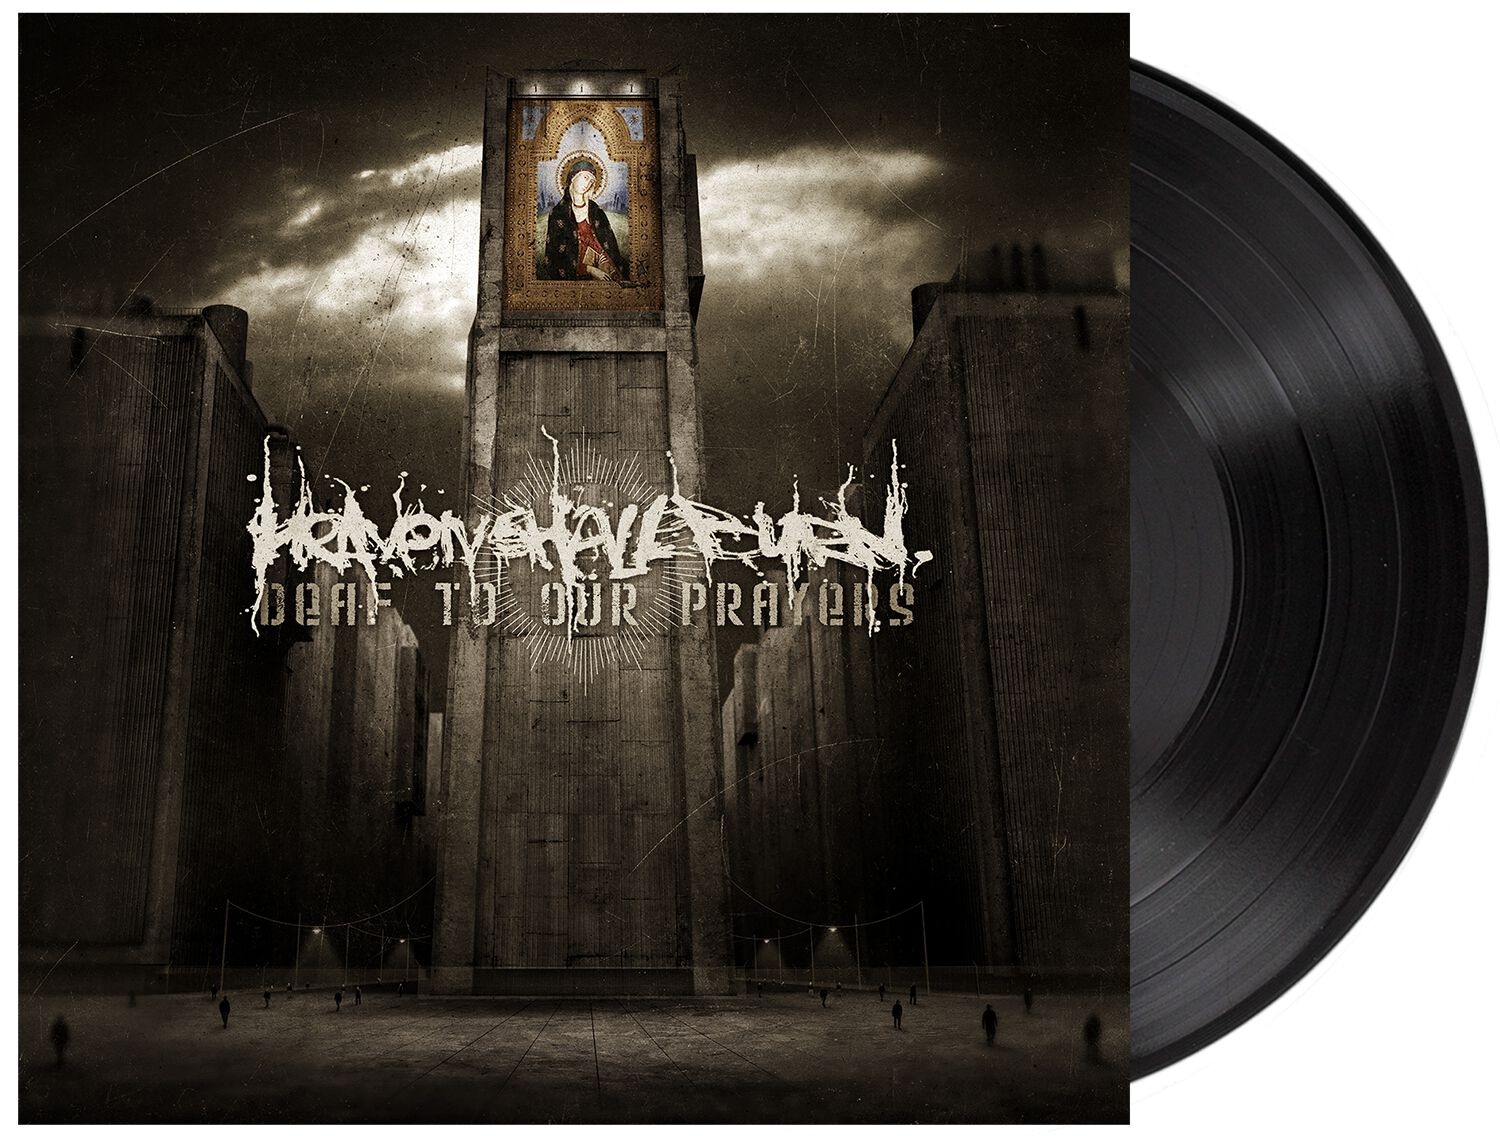 Image of Heaven Shall Burn Deaf to our prayers LP schwarz